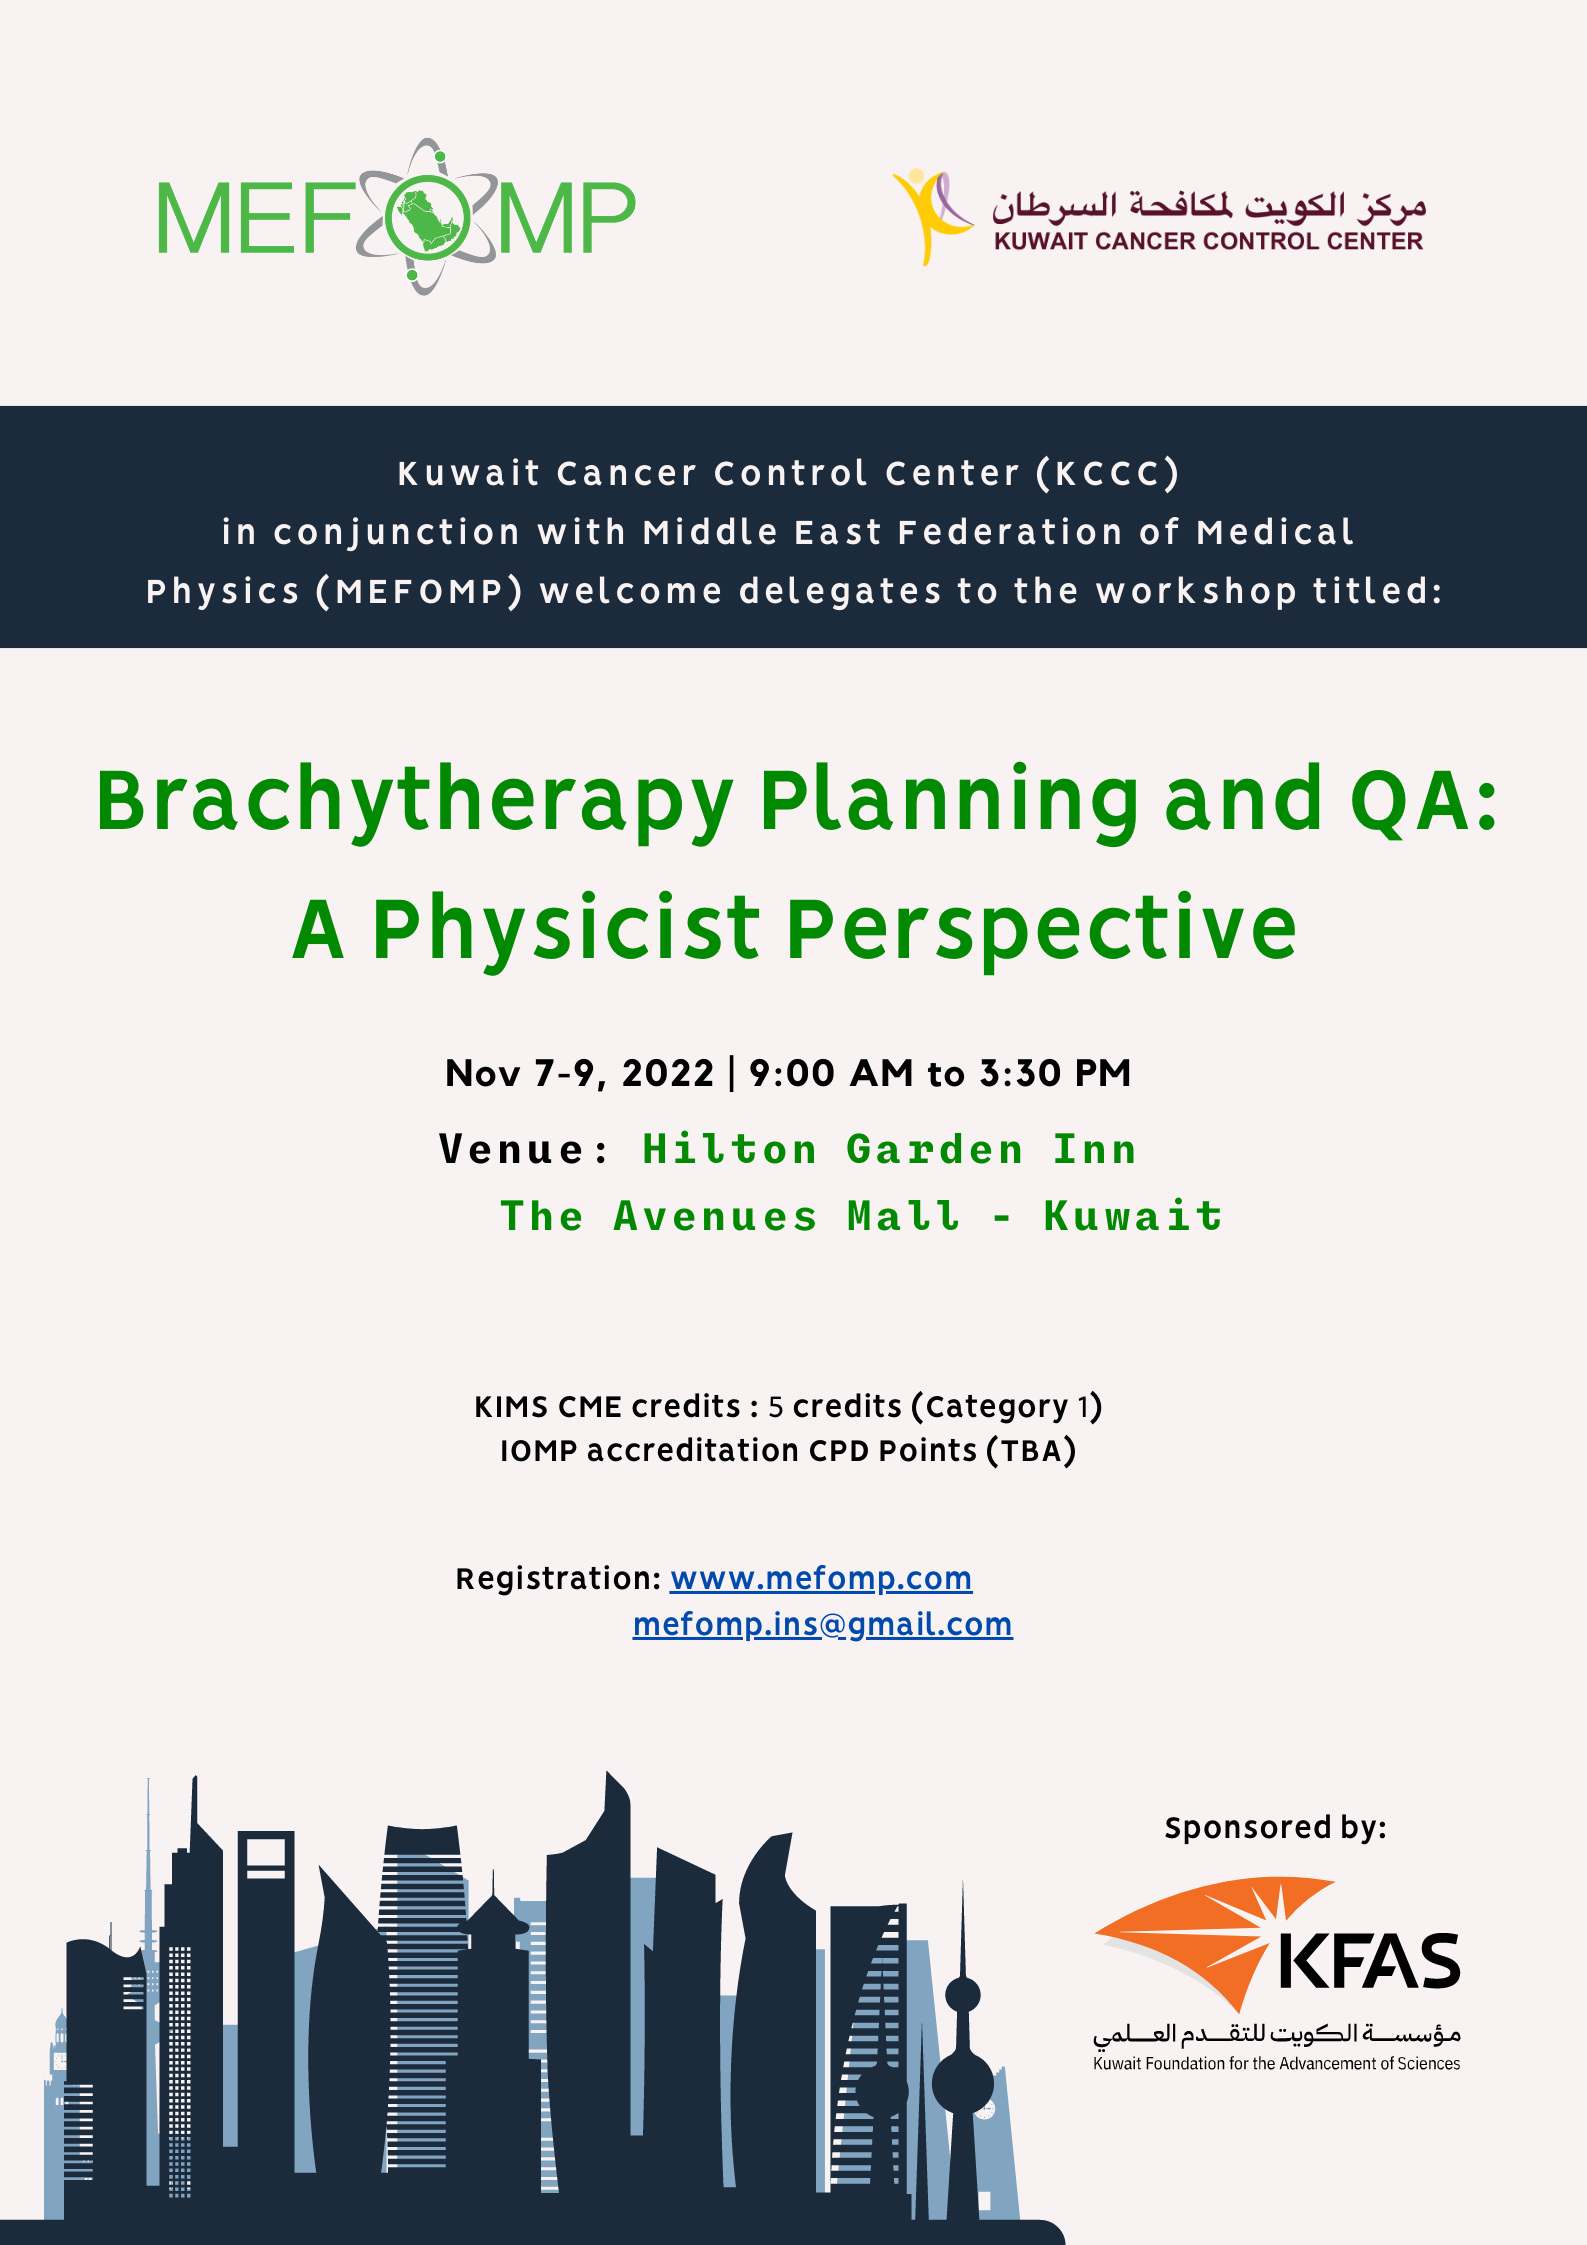 MEFOMP Workshop Activity Brachytherapy Planning and QA, A Physicist Perspective